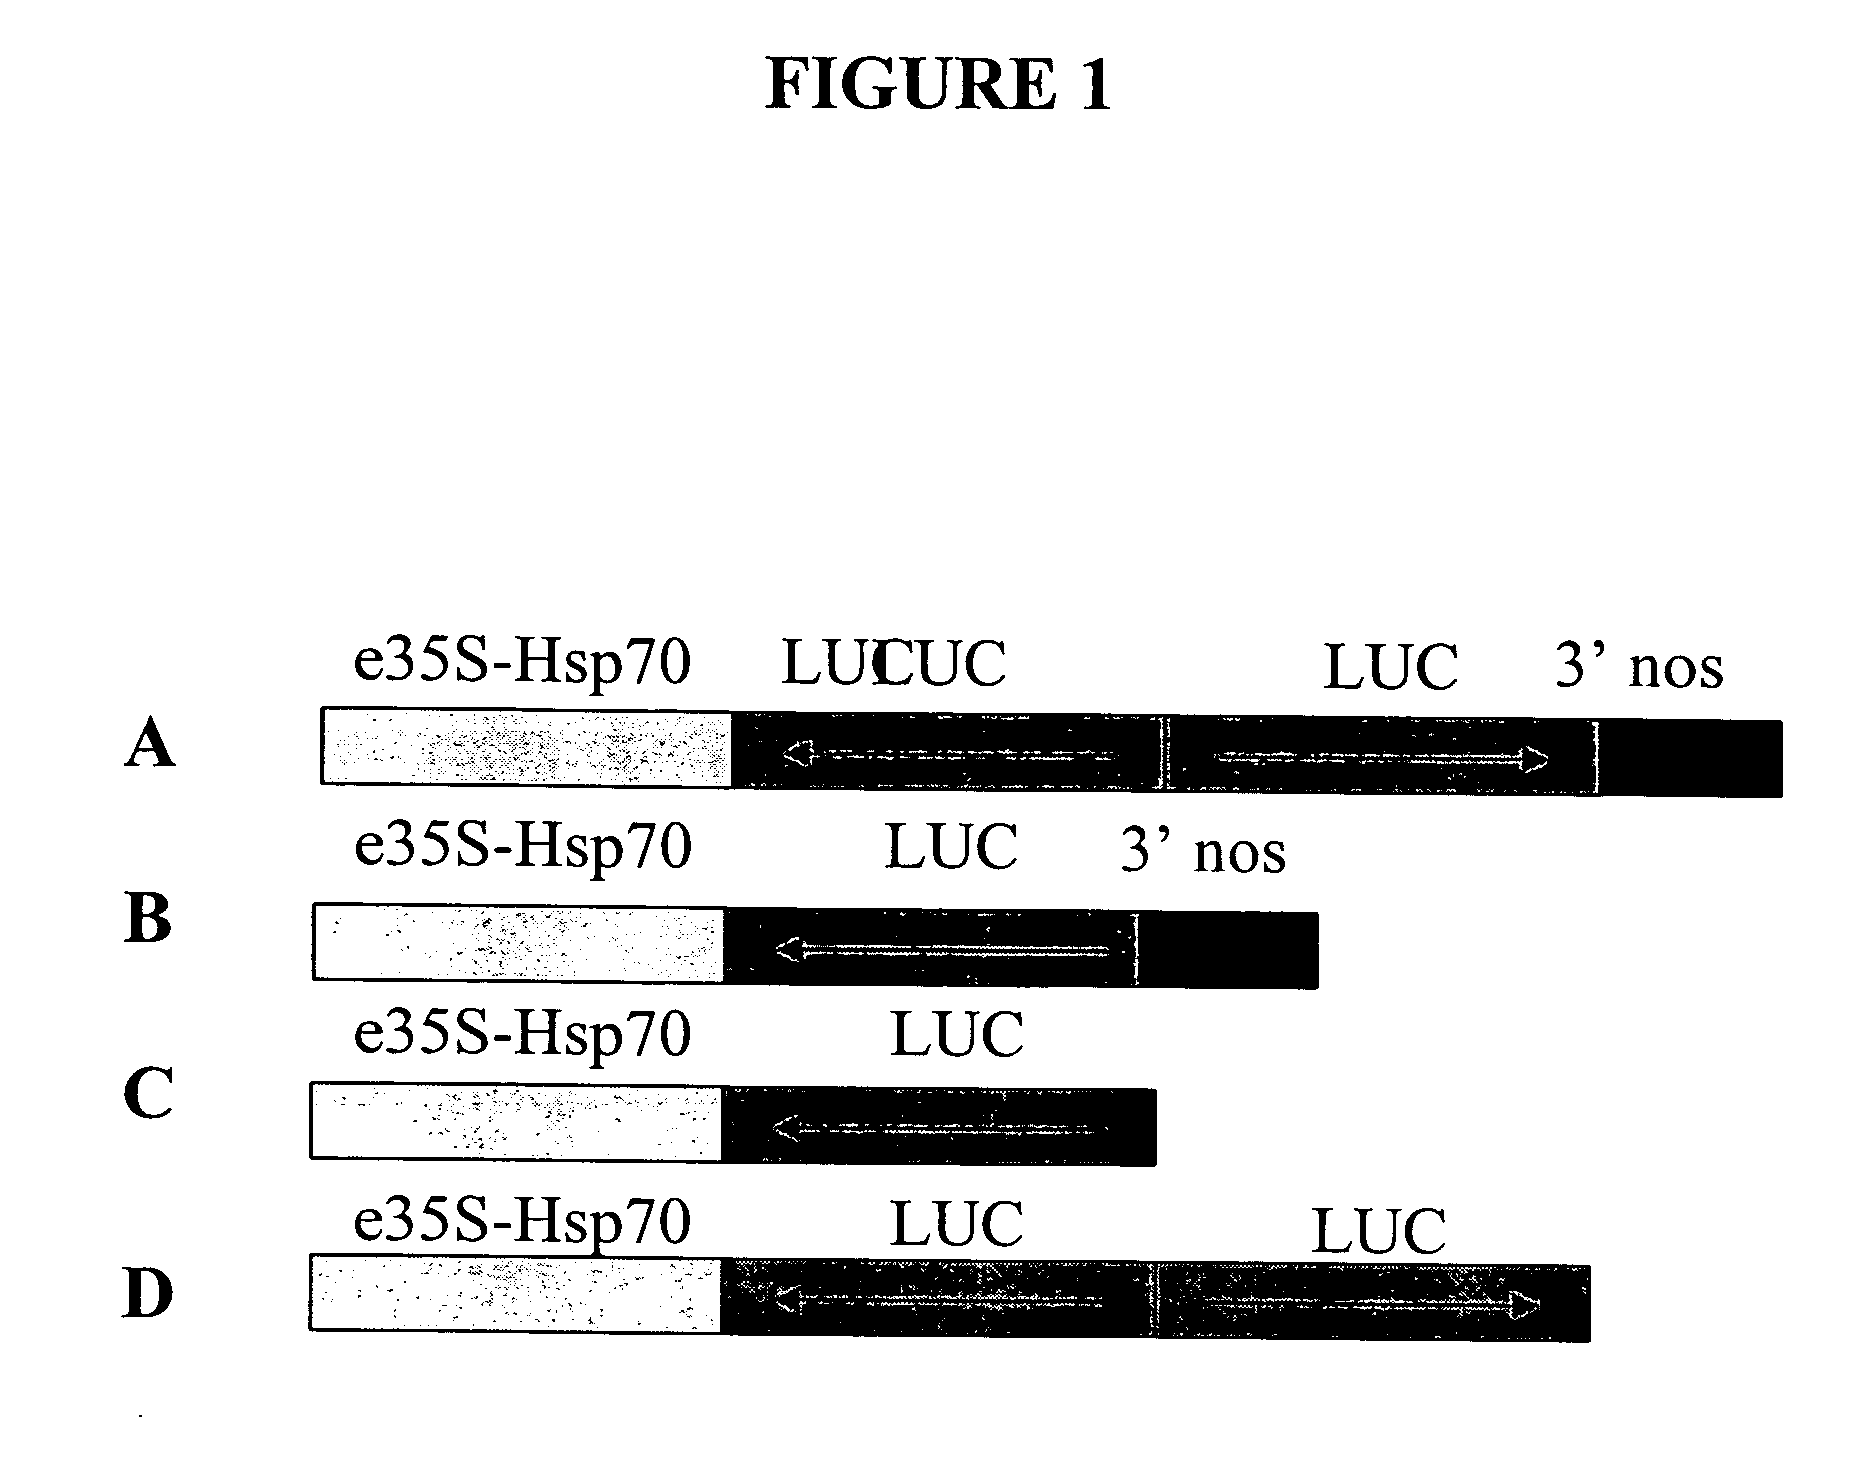 Recombinant DNA constructs and methods for controlling gene expression